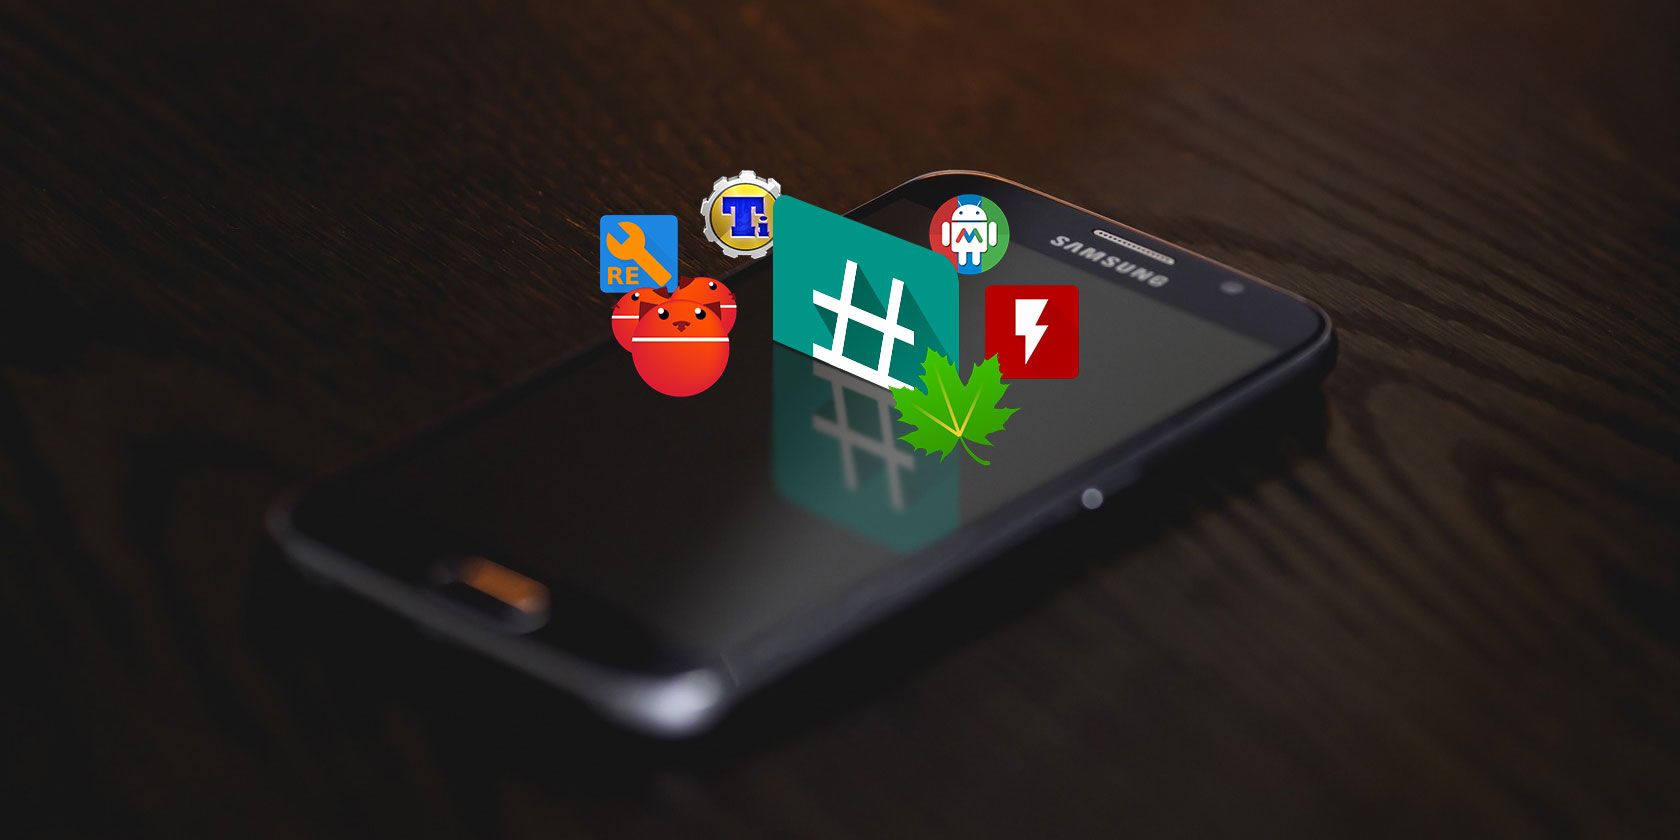 App icons coming out of an Android phone